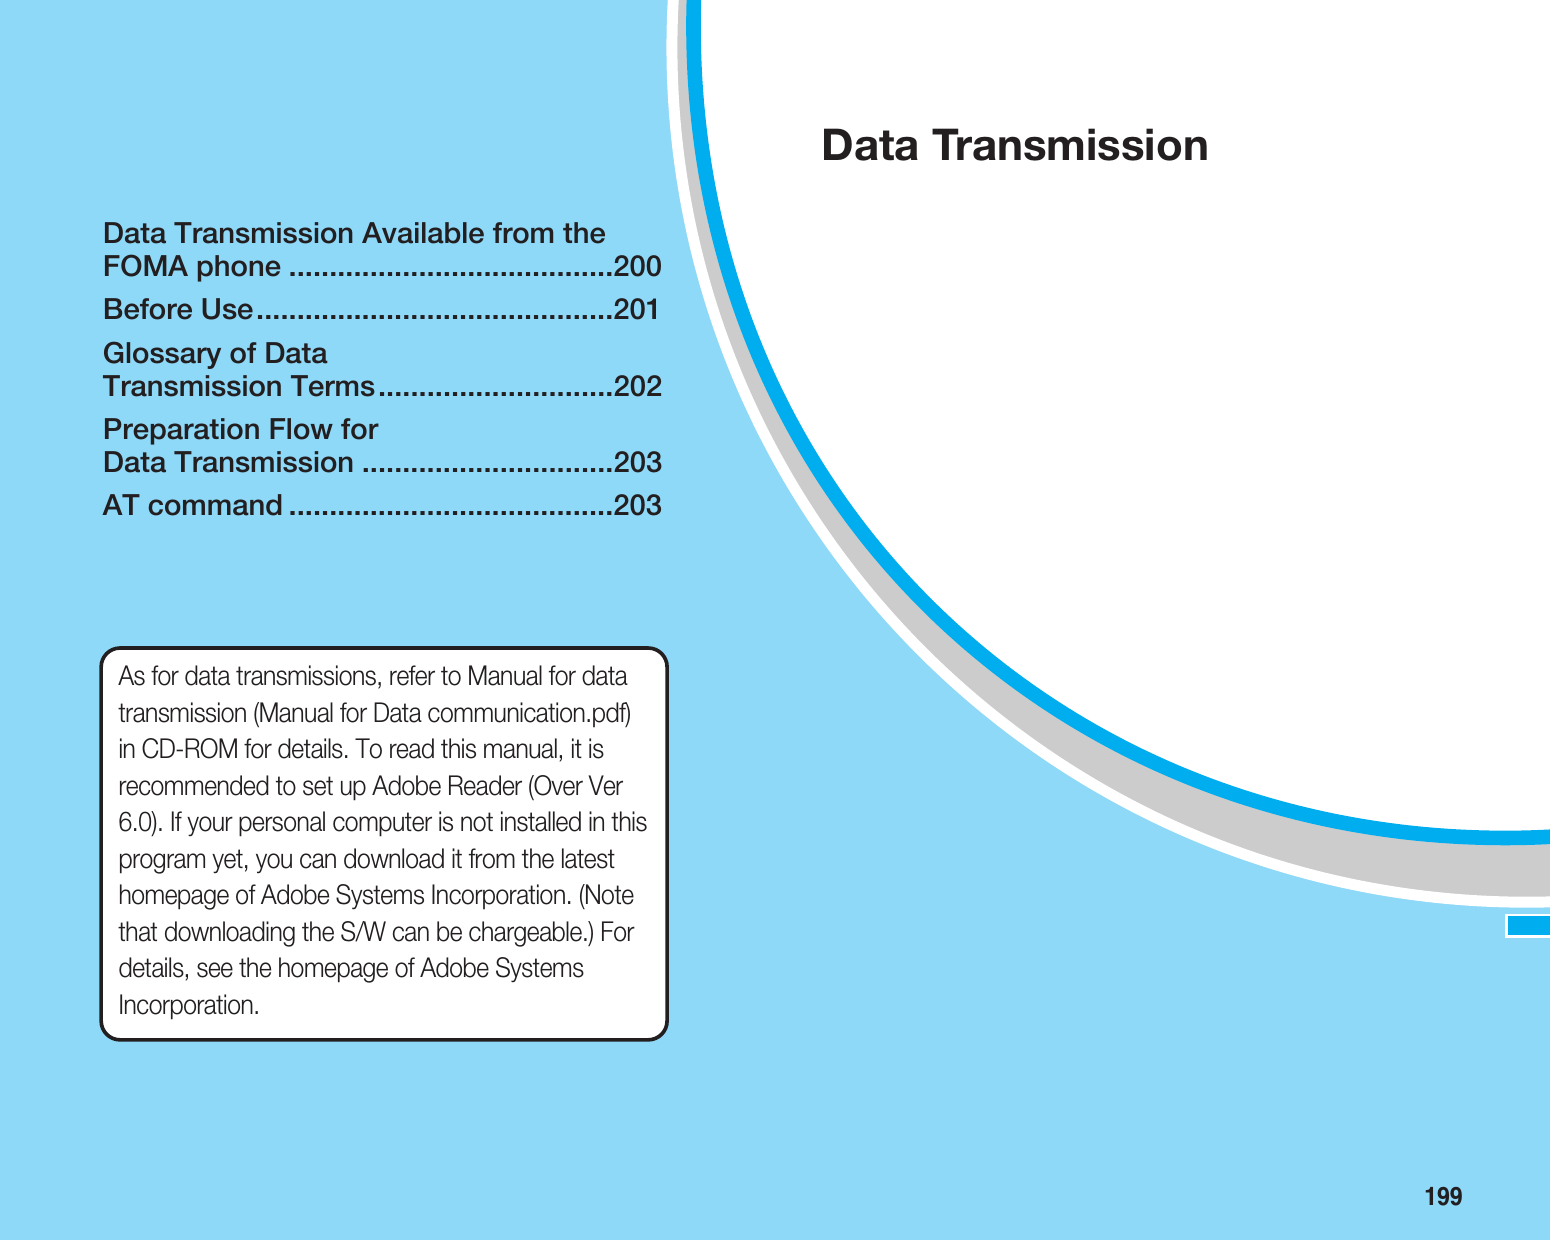 199Data Transmission Available from theFOMA phone ........................................200Before Use............................................201Glossary of Data Transmission Terms.............................202Preparation Flow for Data Transmission ...............................203AT command ........................................203Data TransmissionAs for data transmissions, refer to Manual for datatransmission (Manual for Data communication.pdf)in CD-ROM for details. To read this manual, it isrecommended to set up Adobe Reader (Over Ver6.0). If your personal computer is not installed in thisprogram yet, you can download it from the latesthomepage of Adobe Systems Incorporation. (Notethat downloading the S/W can be chargeable.) Fordetails, see the homepage of Adobe SystemsIncorporation.